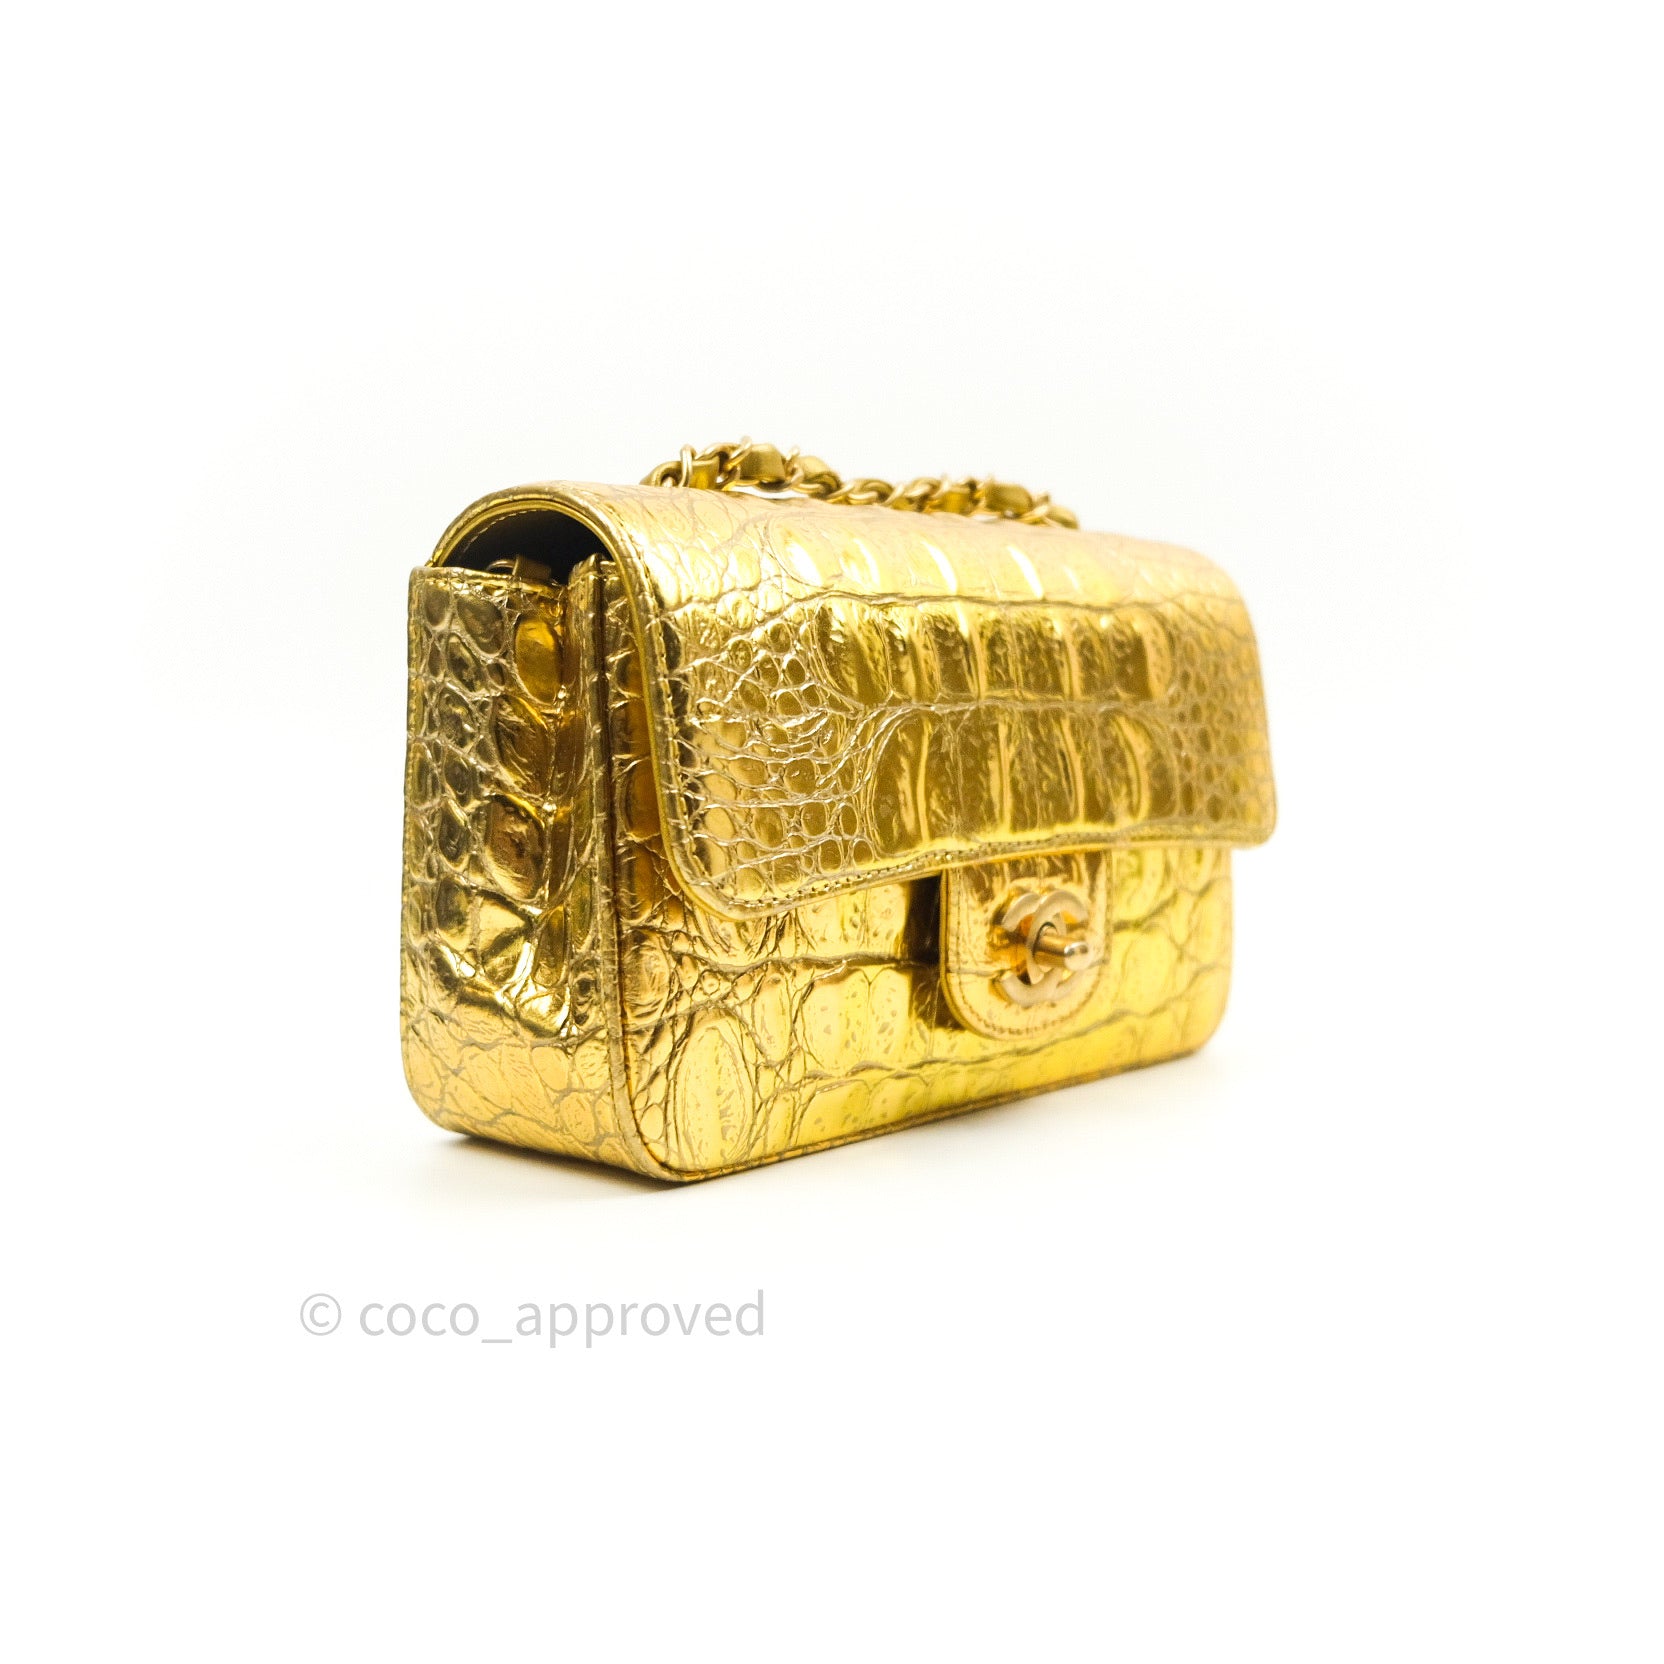 New CHANEL Gold Croc Embossed Zip O Coin Purse Wallet – Fashion